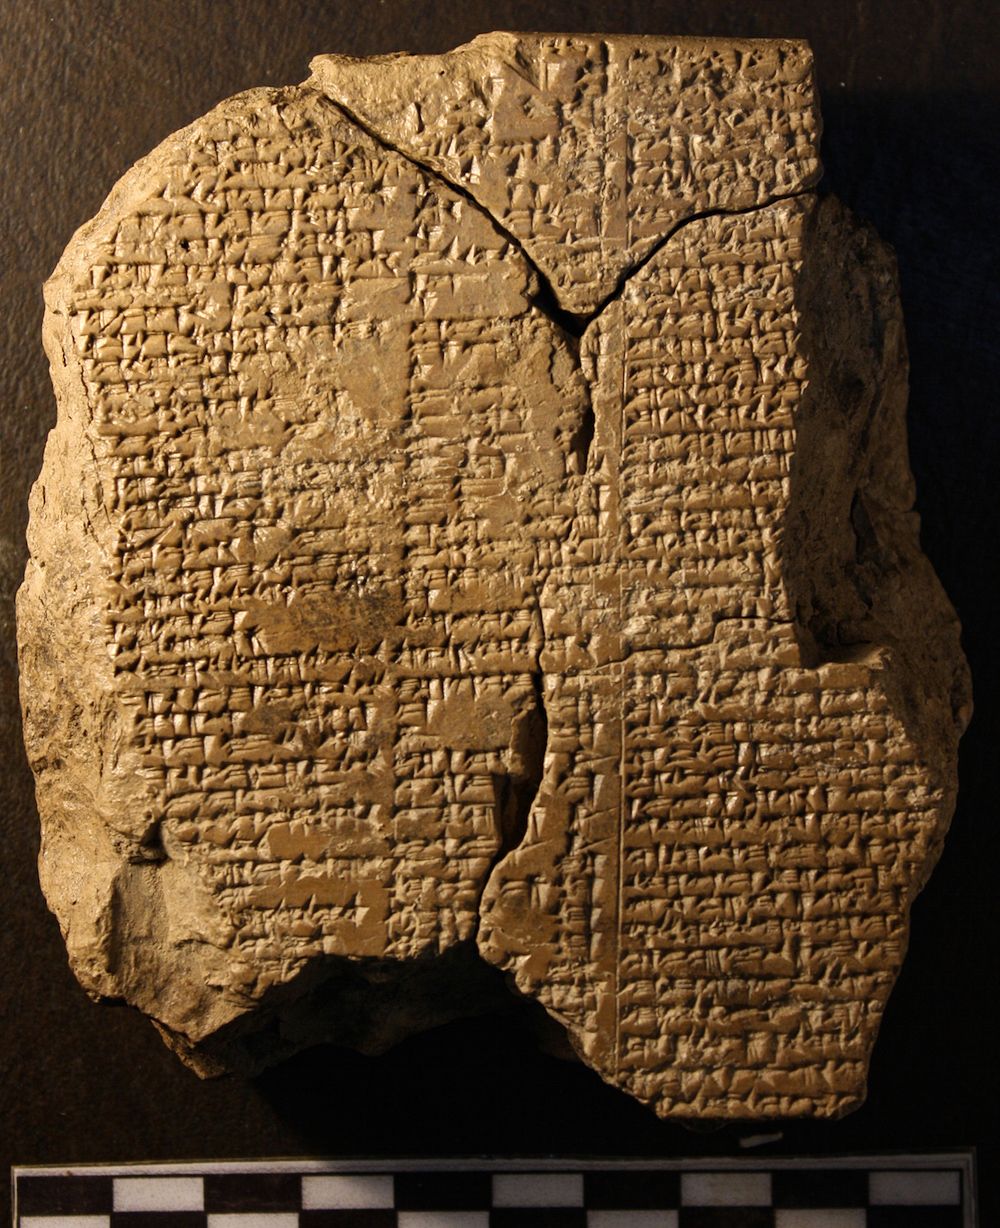 This clay tablet in inscribed with one part of the Epic of Gilgamesh. It was most likely stolen from a historical site before it was sold to a museum in Iraq. ©Image Credit: Farouk Al-Rawi